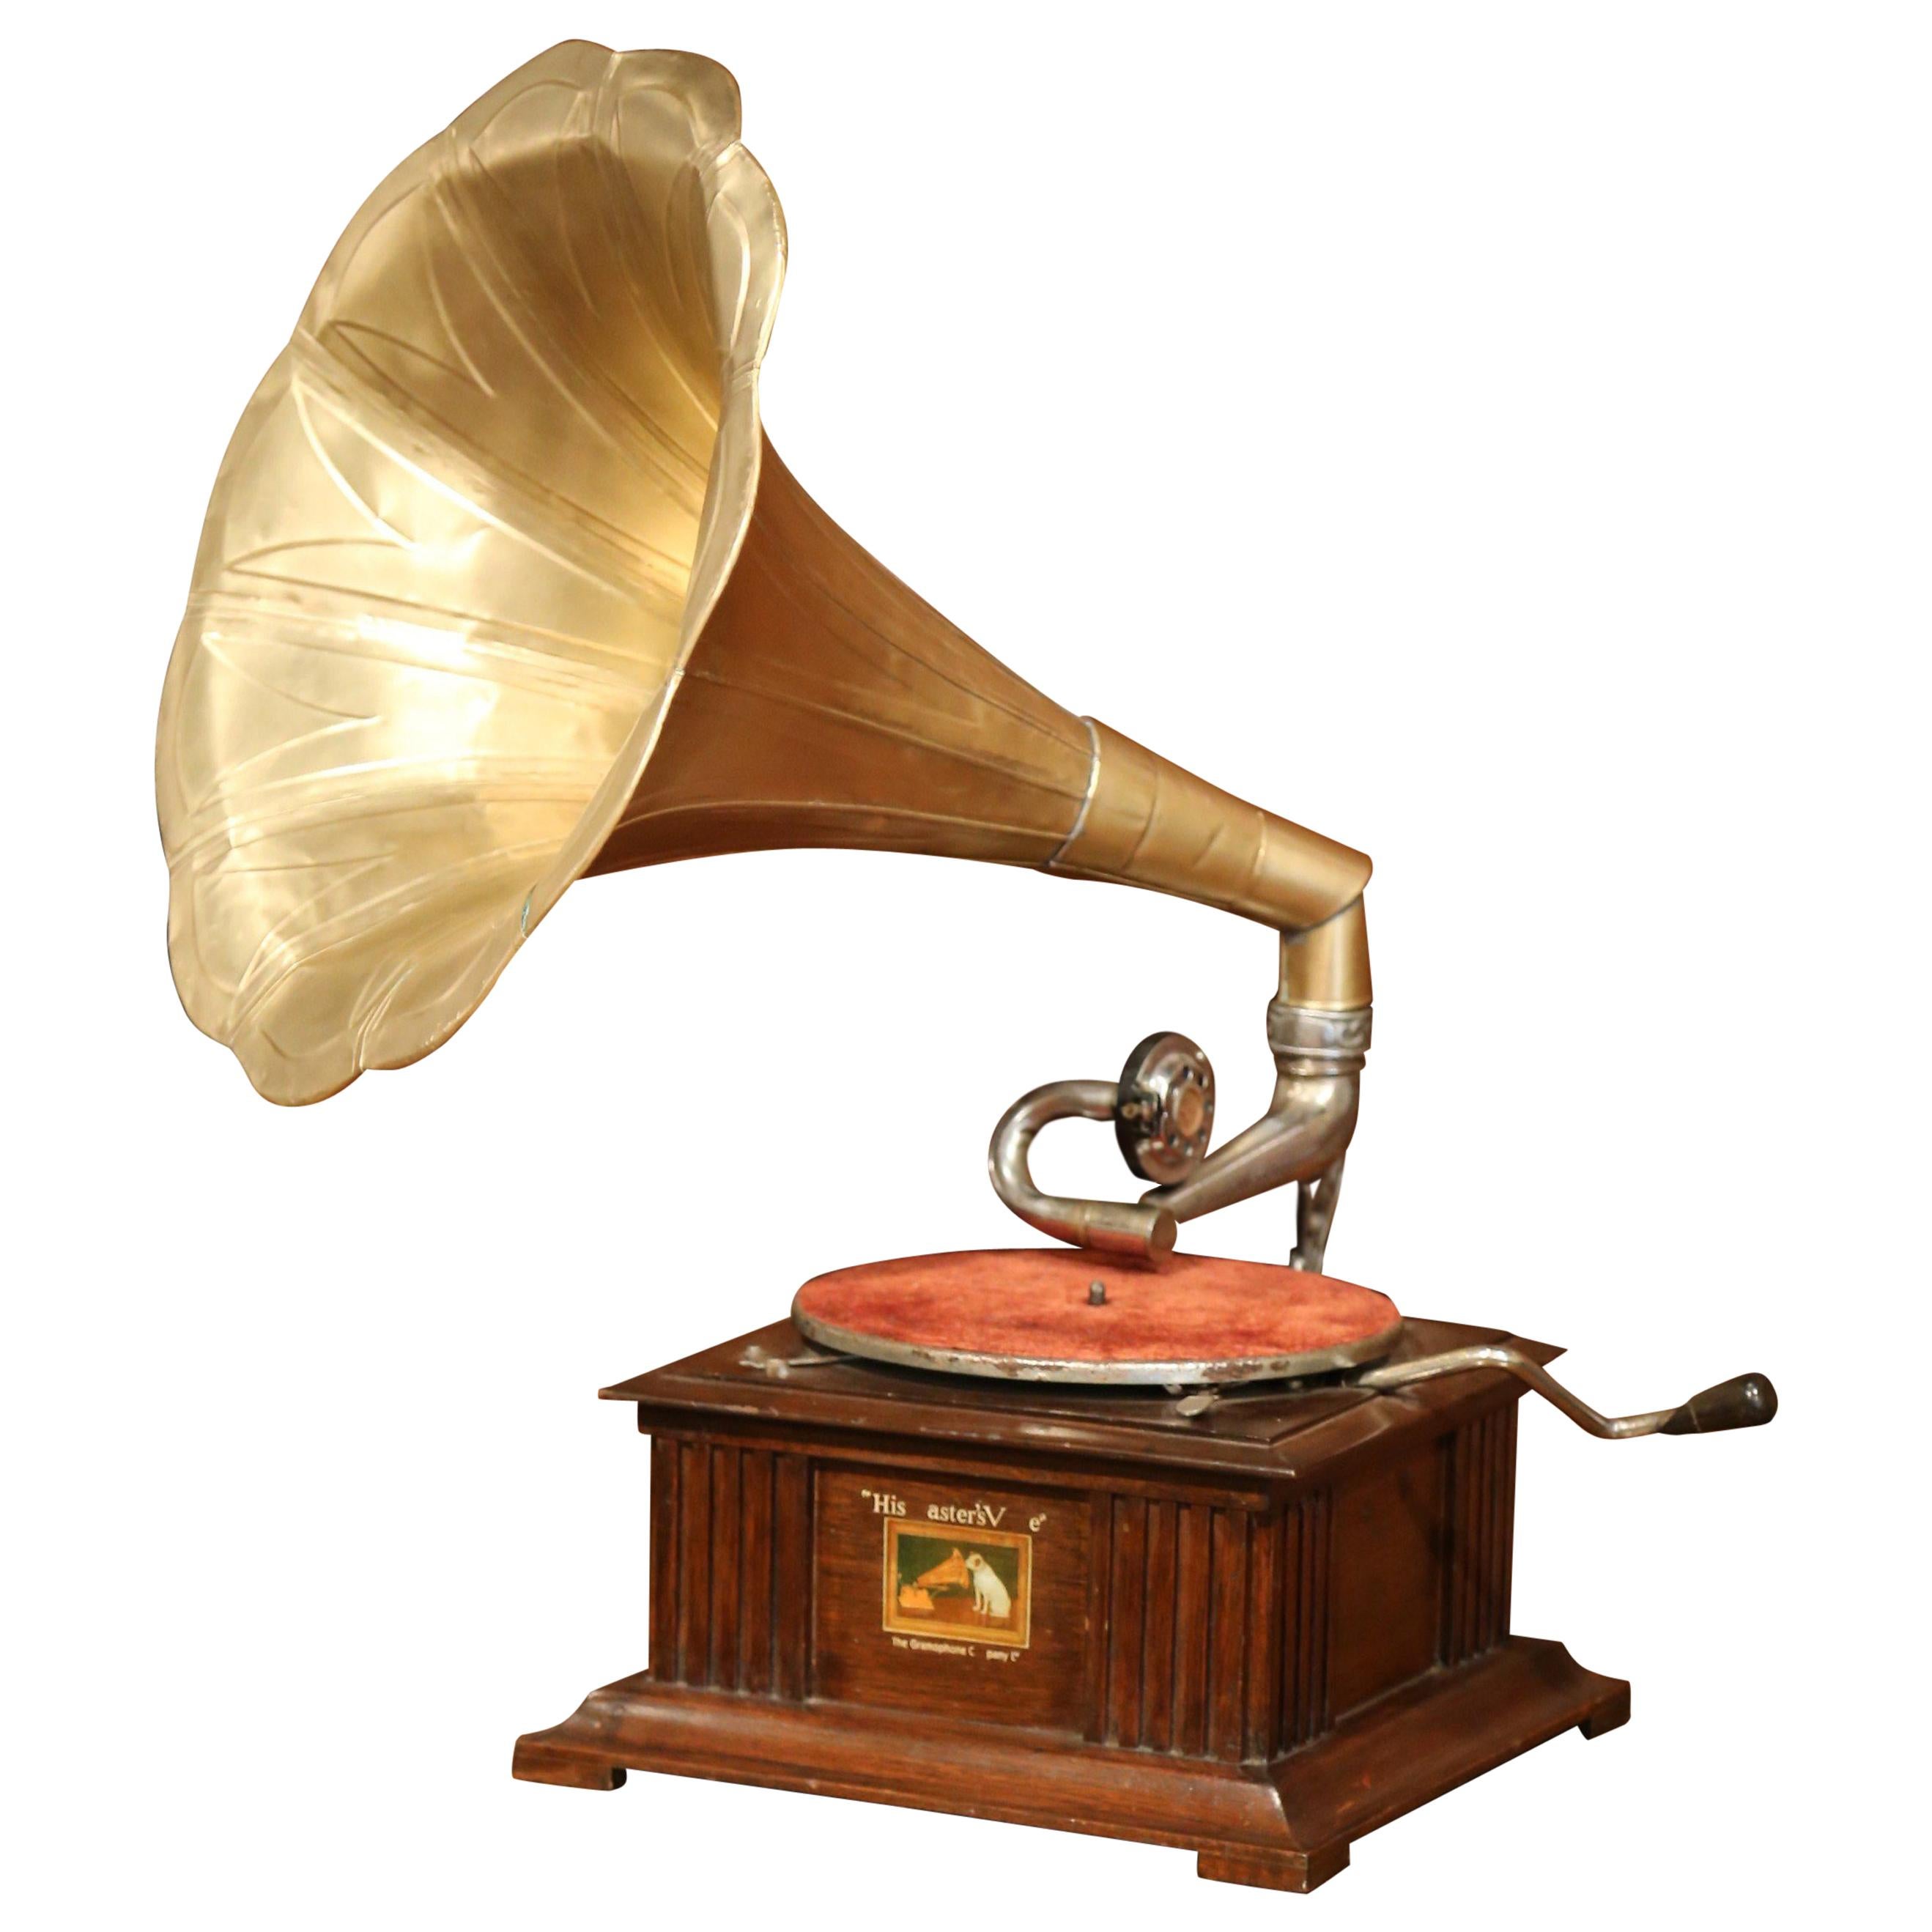 Early 20th Century English "His Master's Voice" Gramophone from Hayes Middlesex